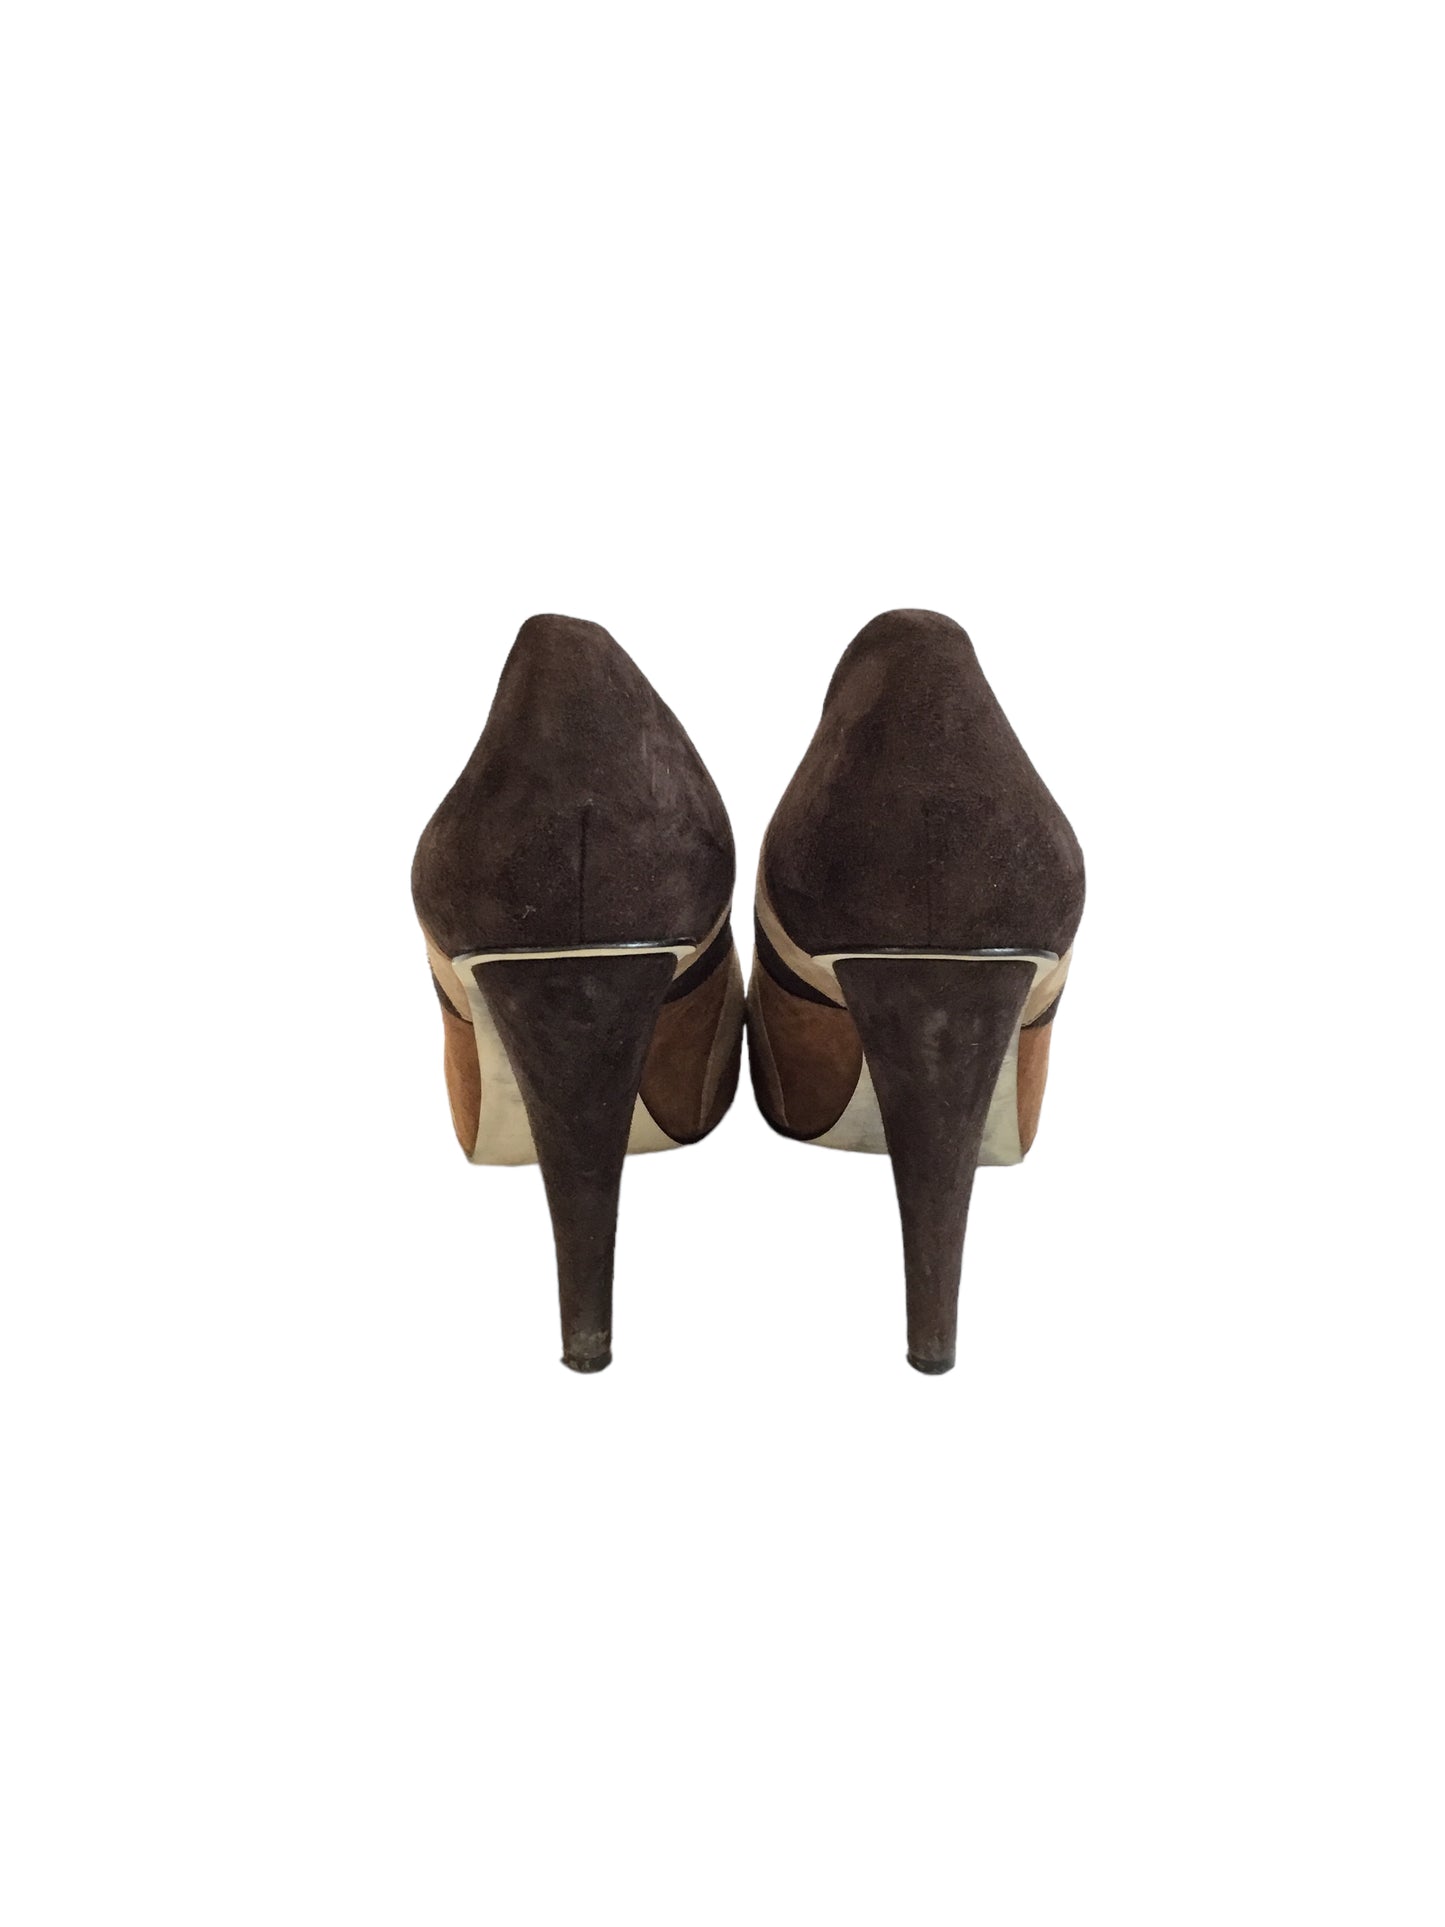 Shoes Heels Stiletto By Enzo Angiolini  Size: 9.5